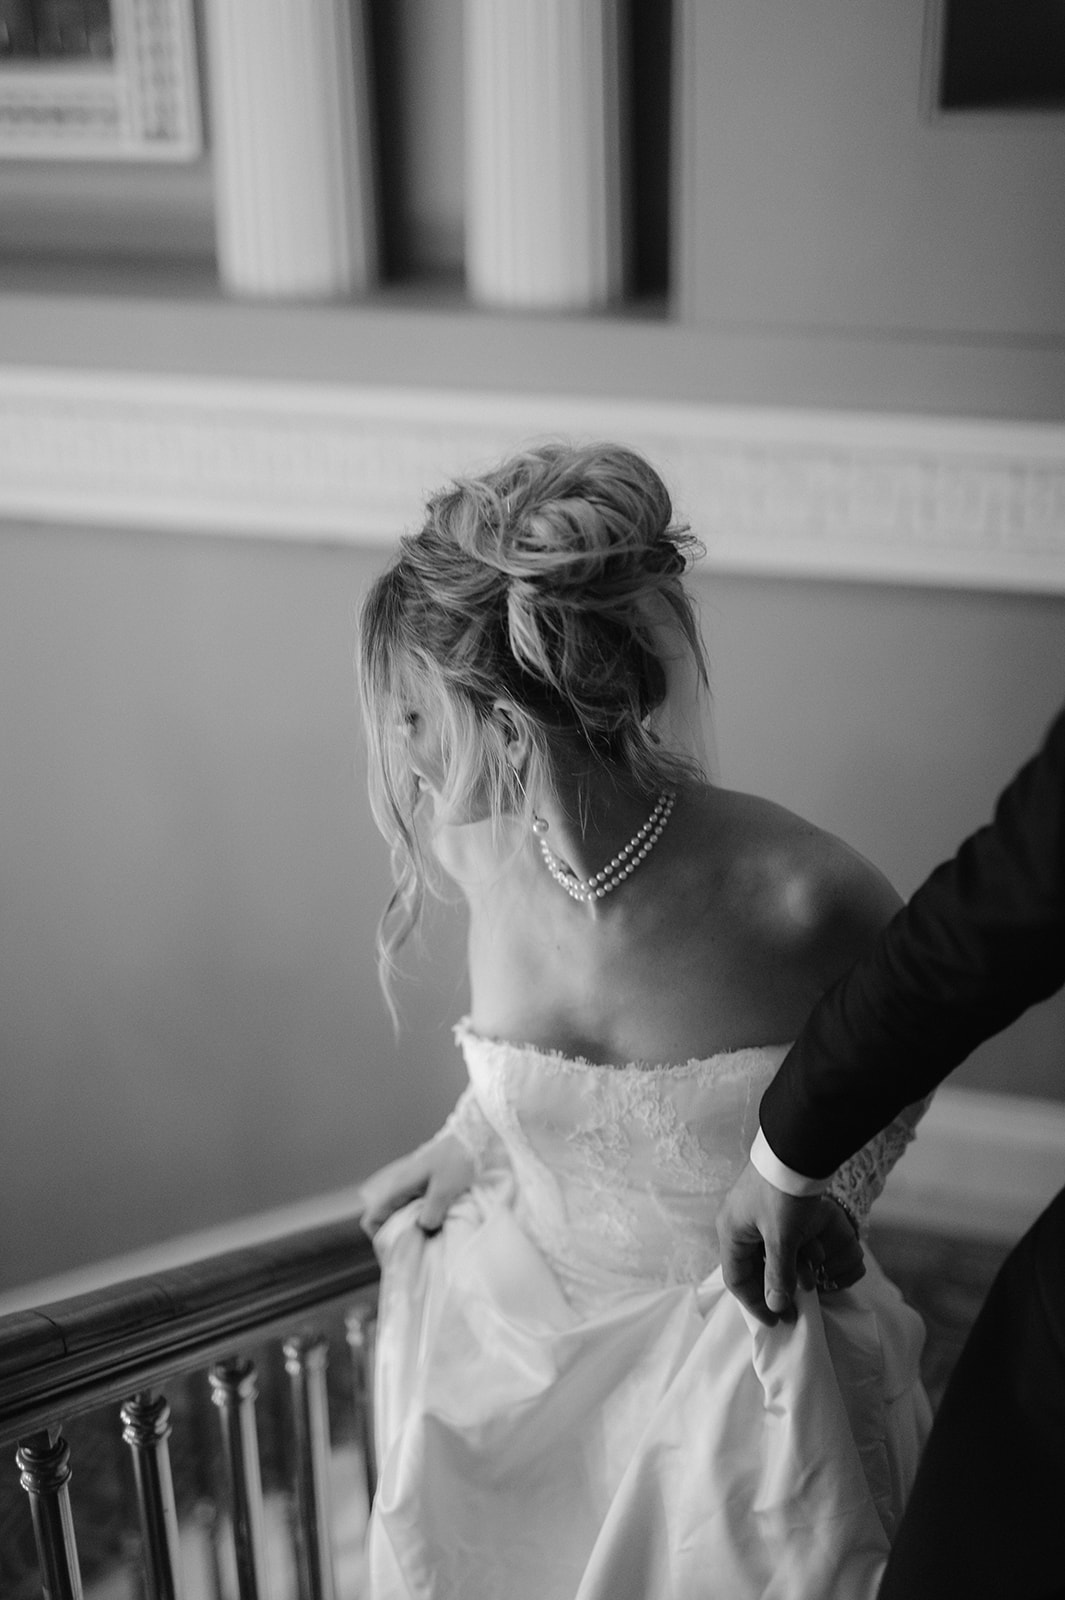 Romantic editorial portrait of a bride and groom walking up stairs.